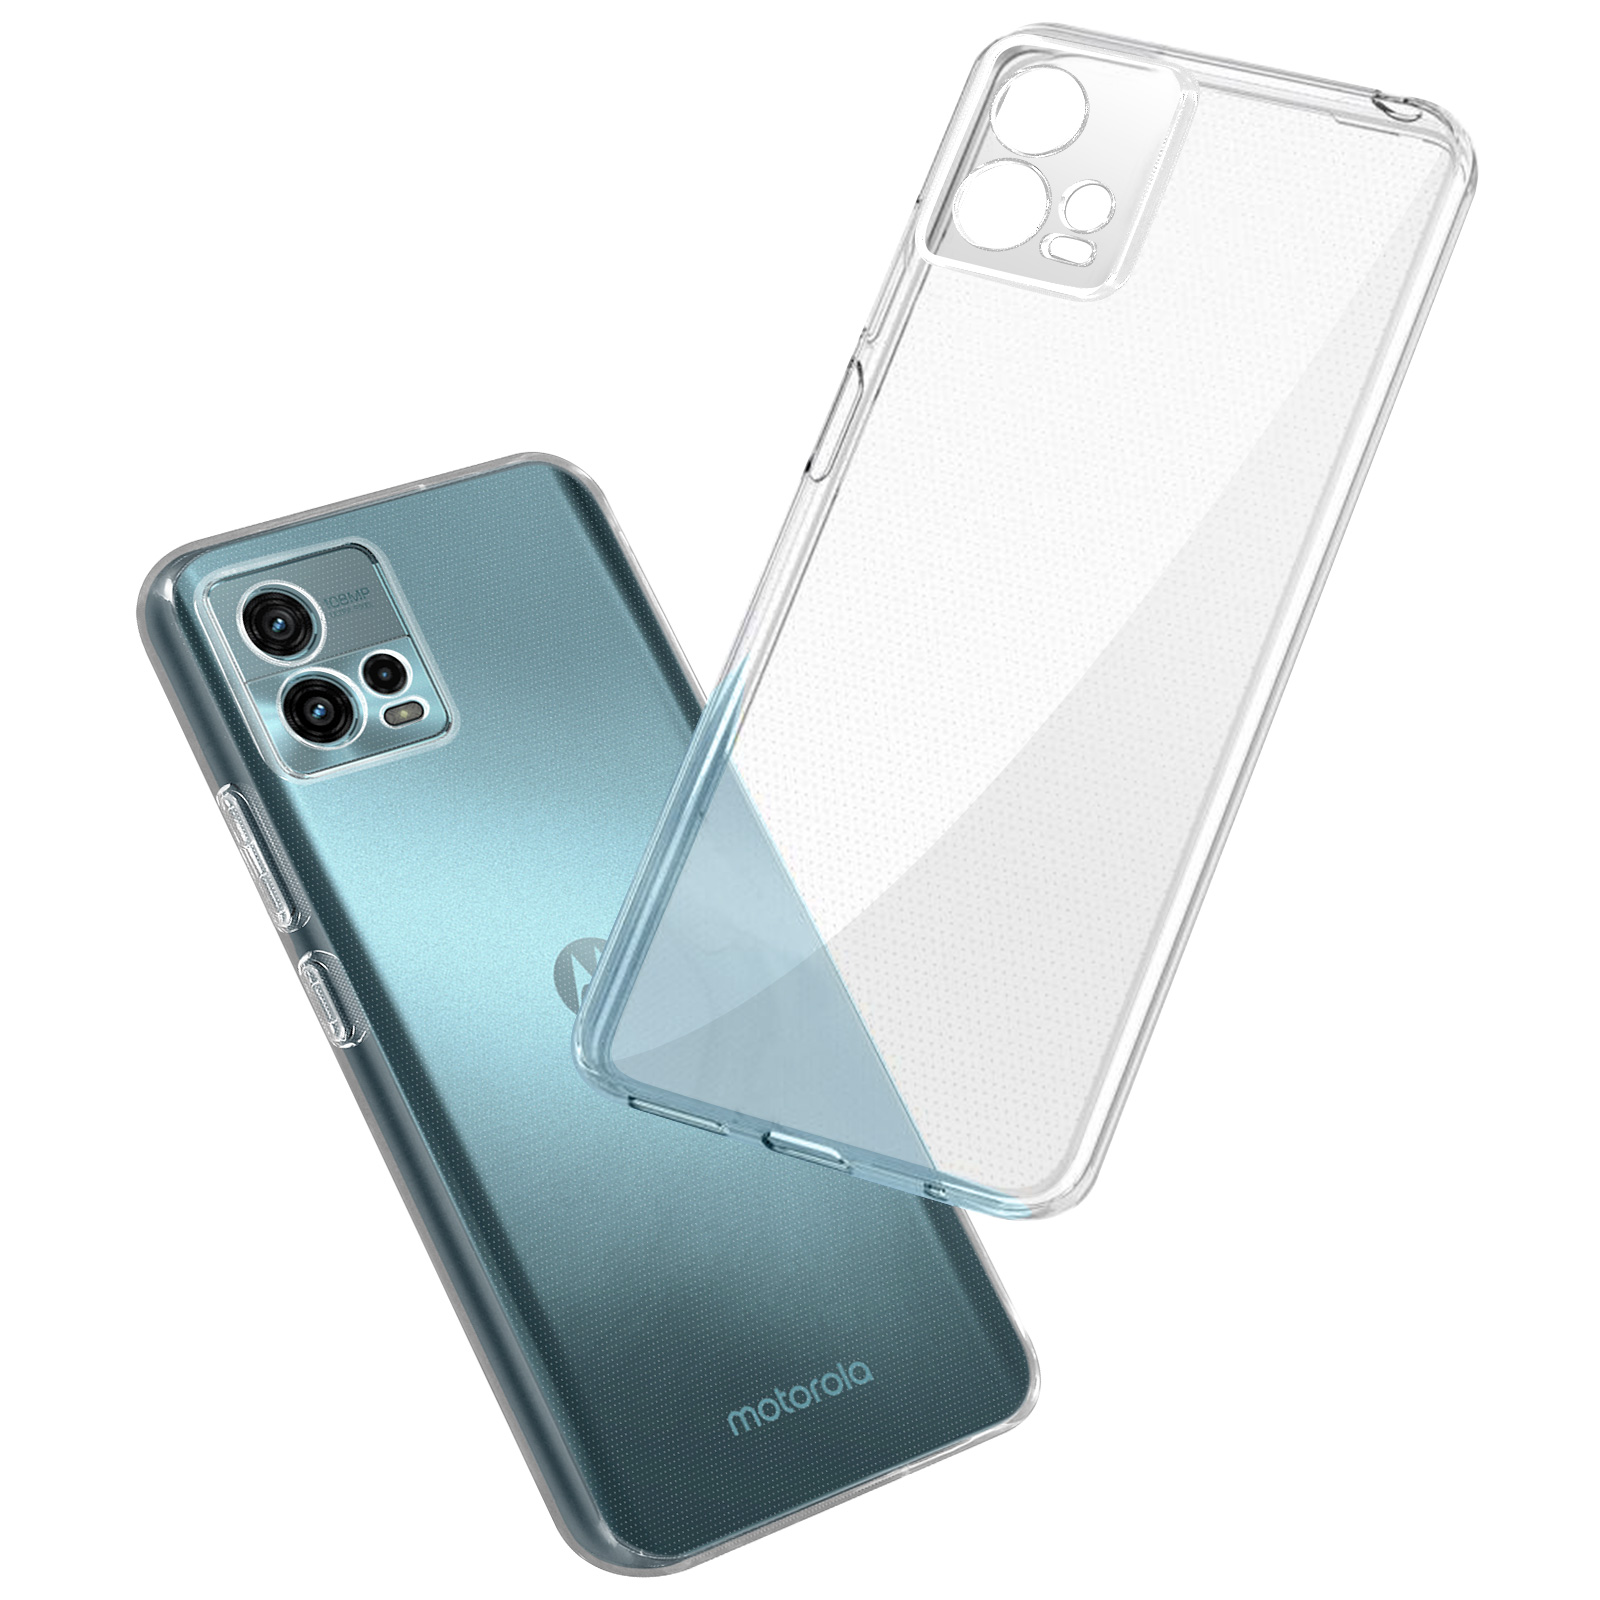 TACTICAL Clear Cover Series, Backcover, Motorola, Transparent G72, Moto